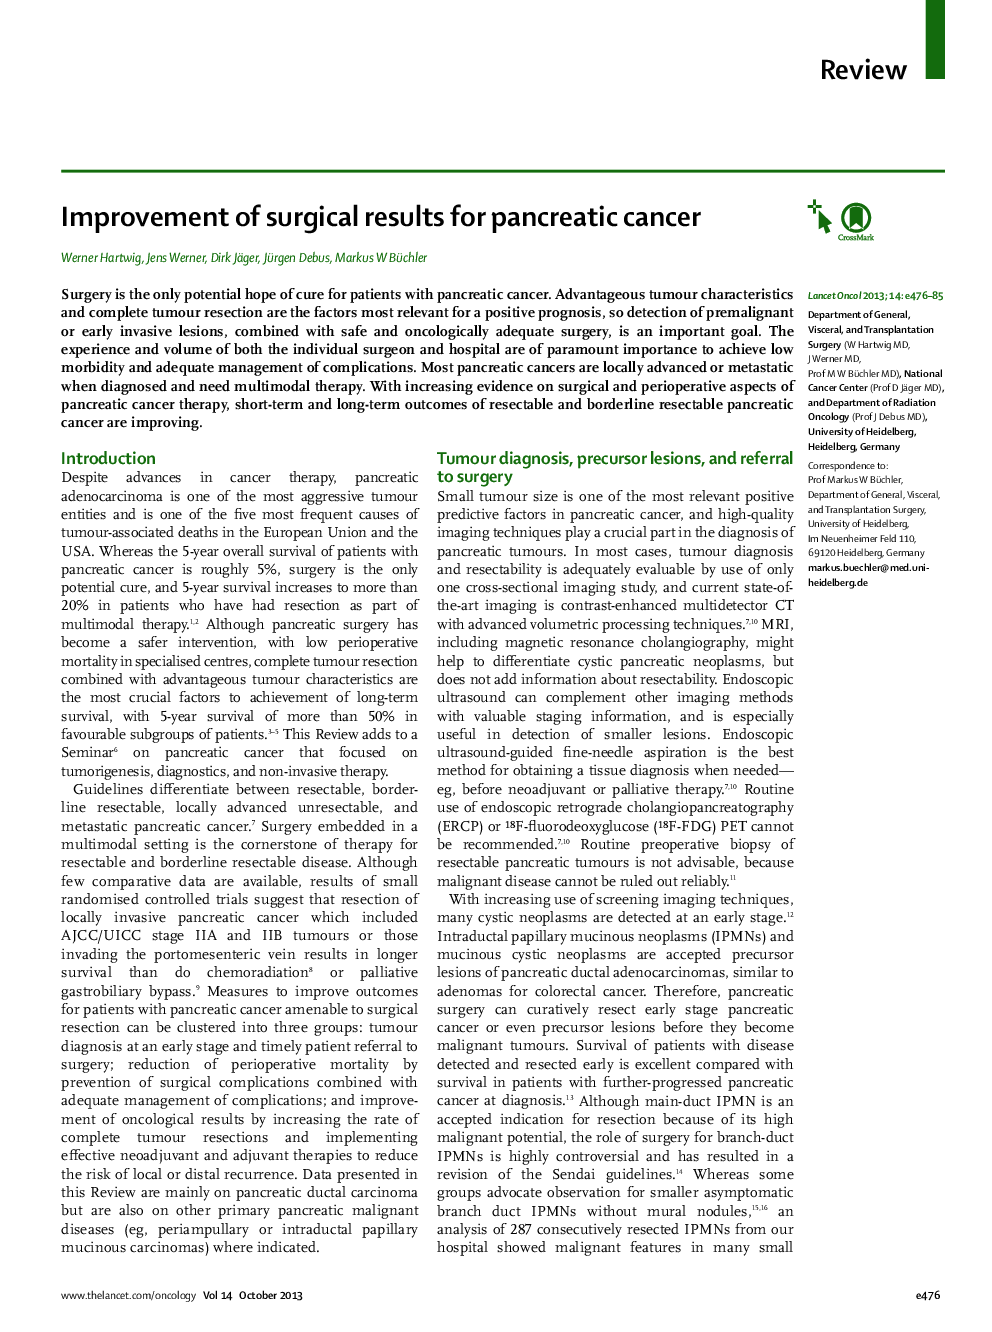 Improvement of surgical results for pancreatic cancer